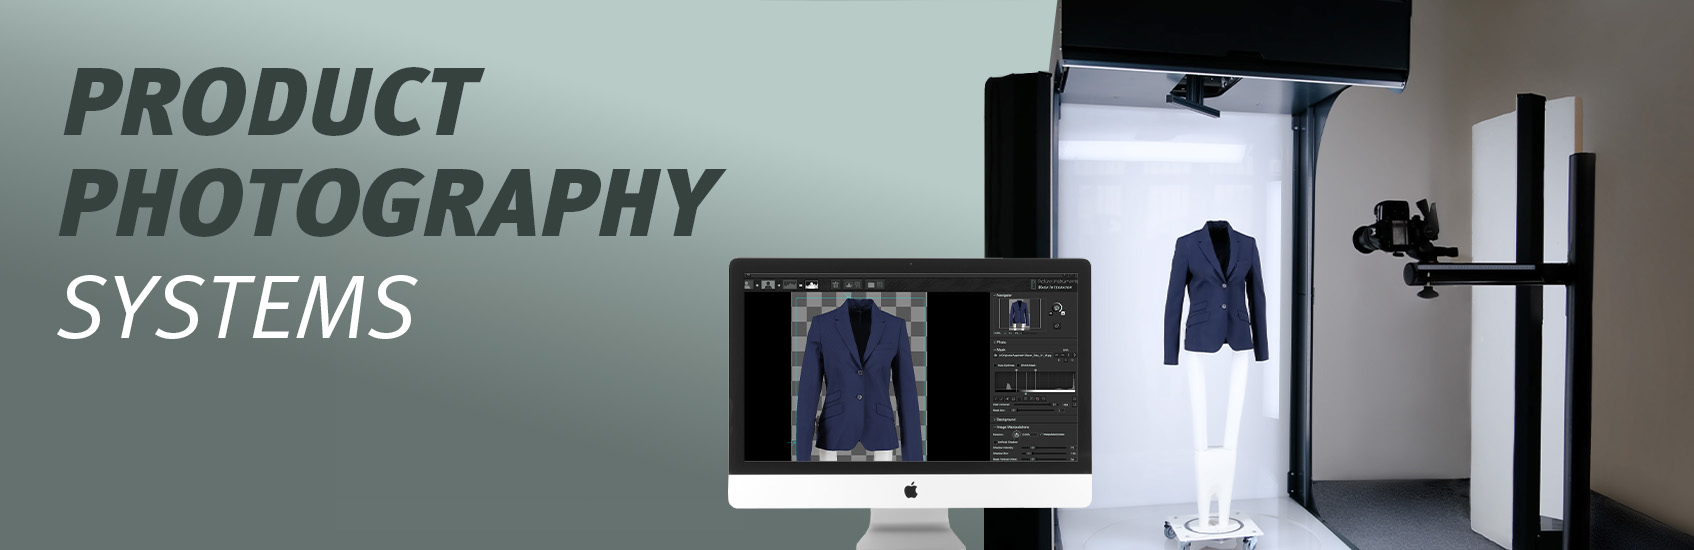 Product Photograpy Systems